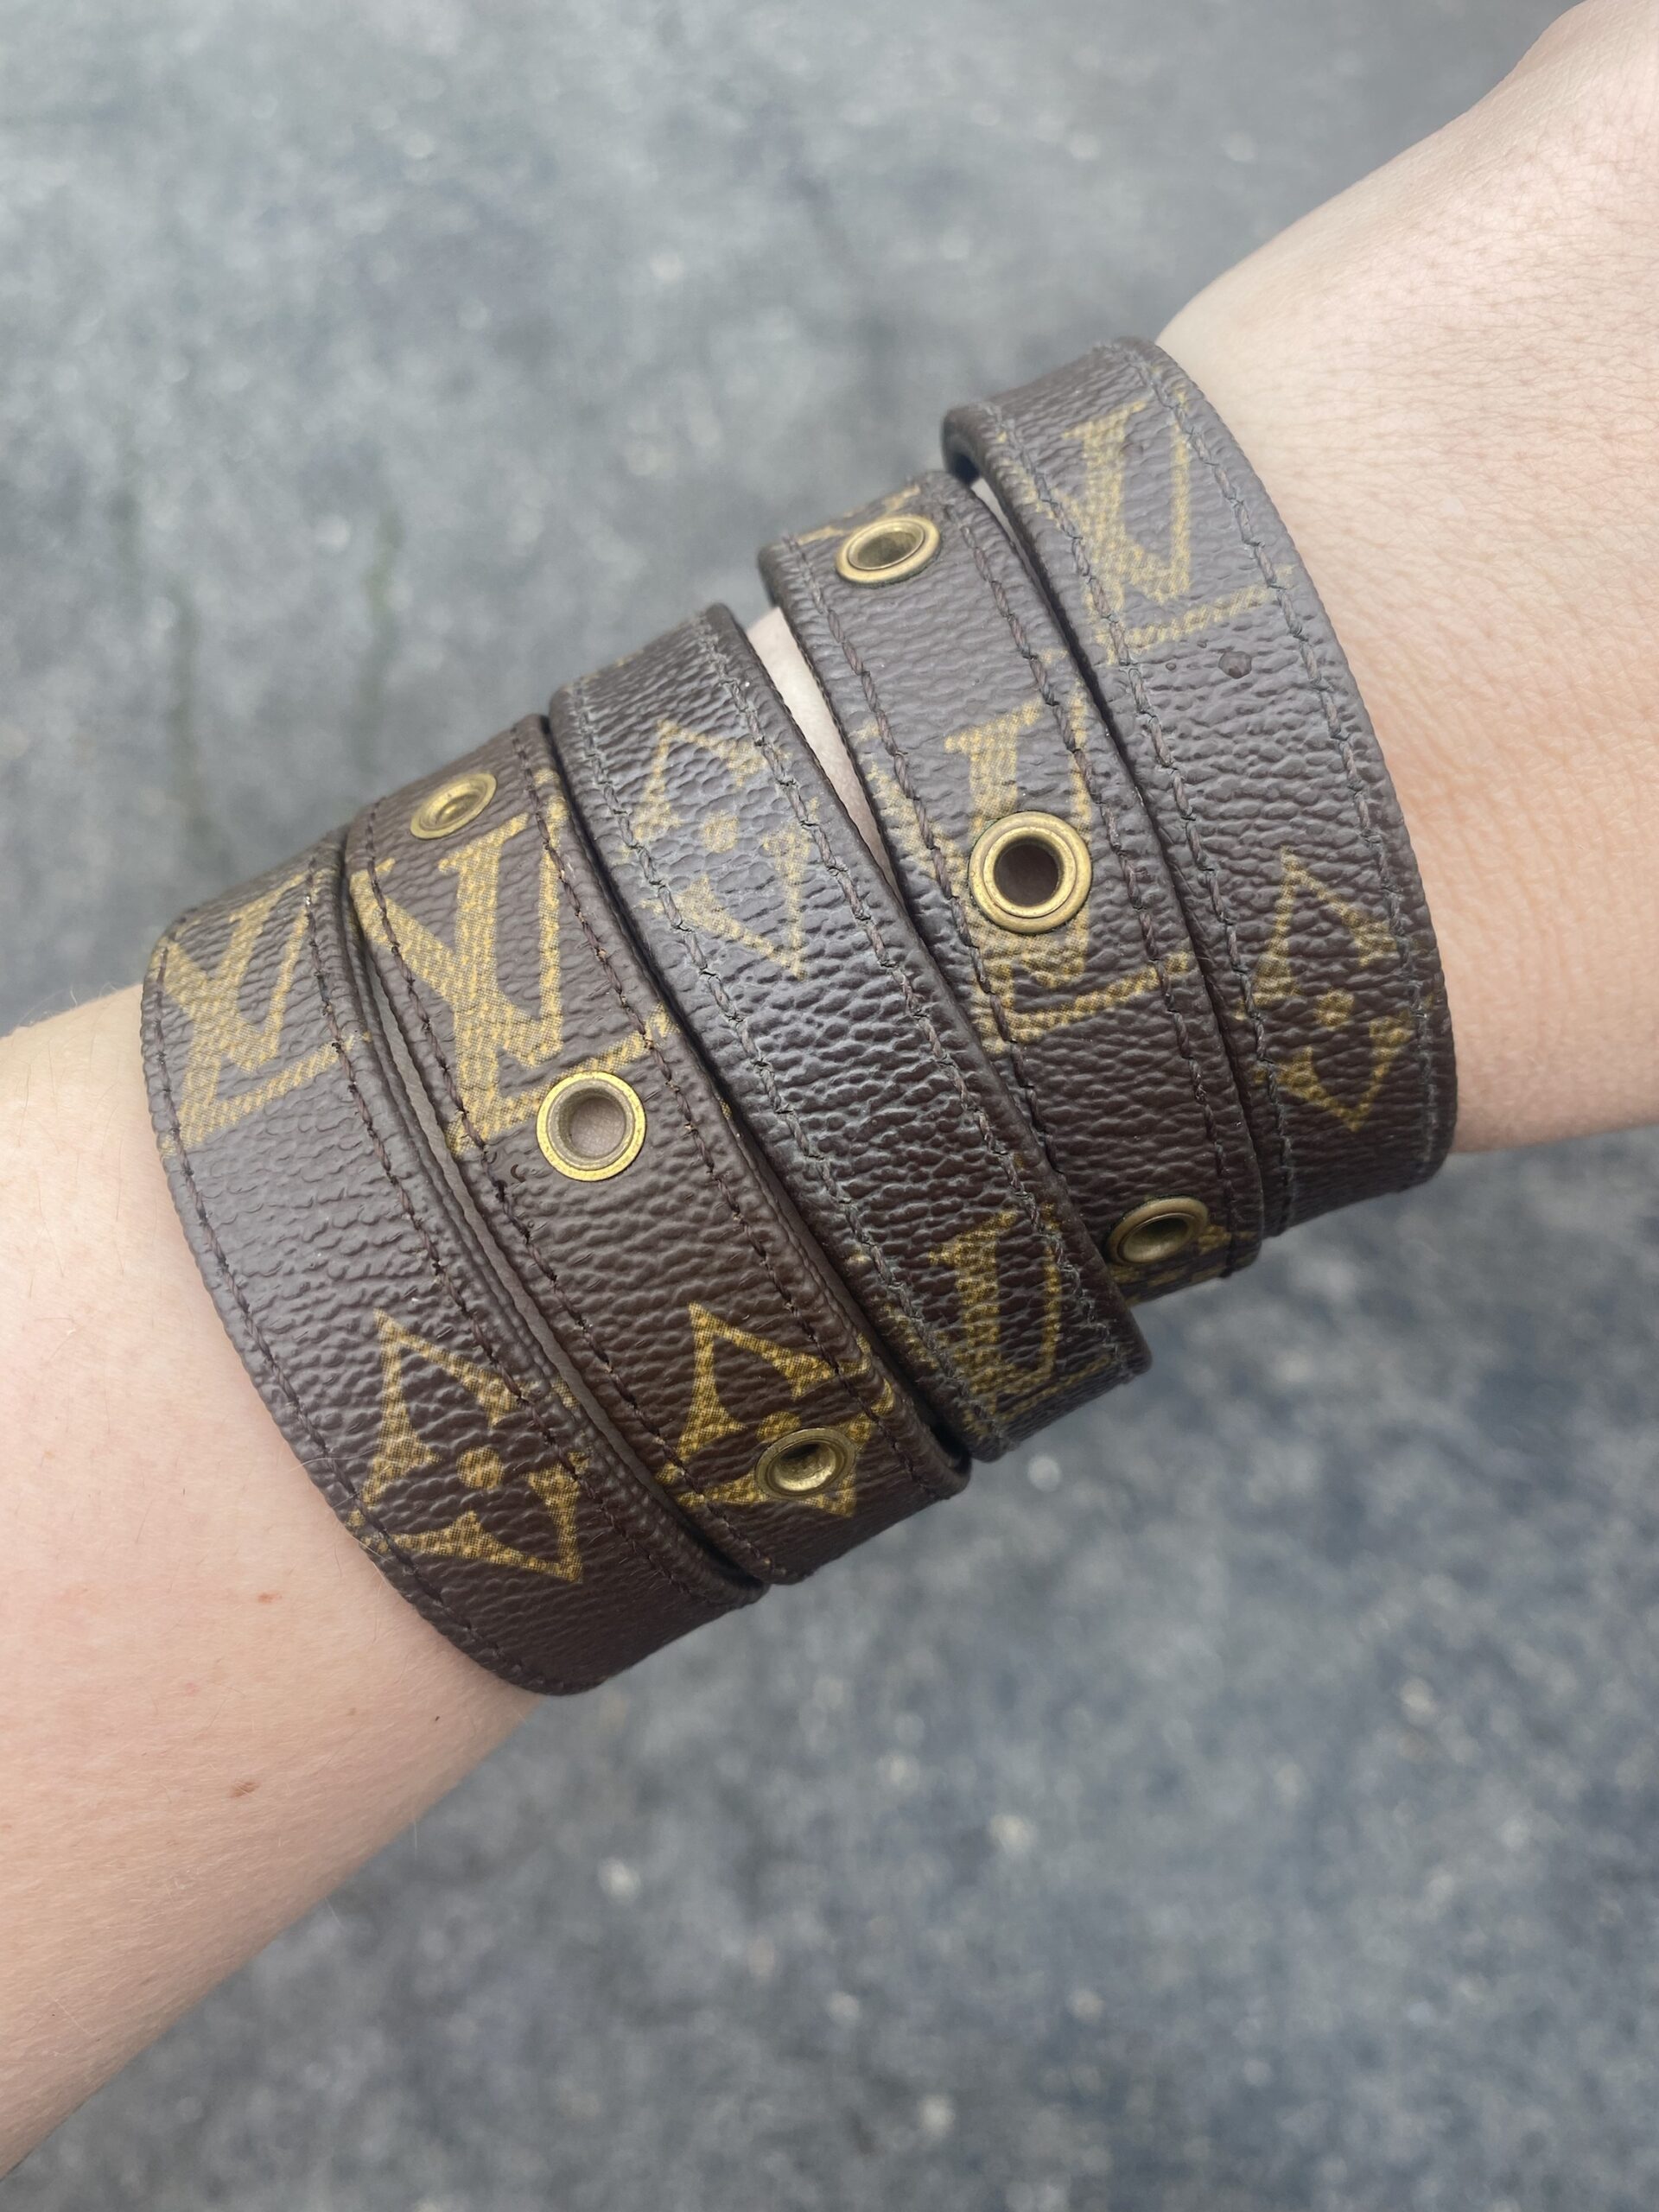 Authentic Upcycled Cuff Bracelets